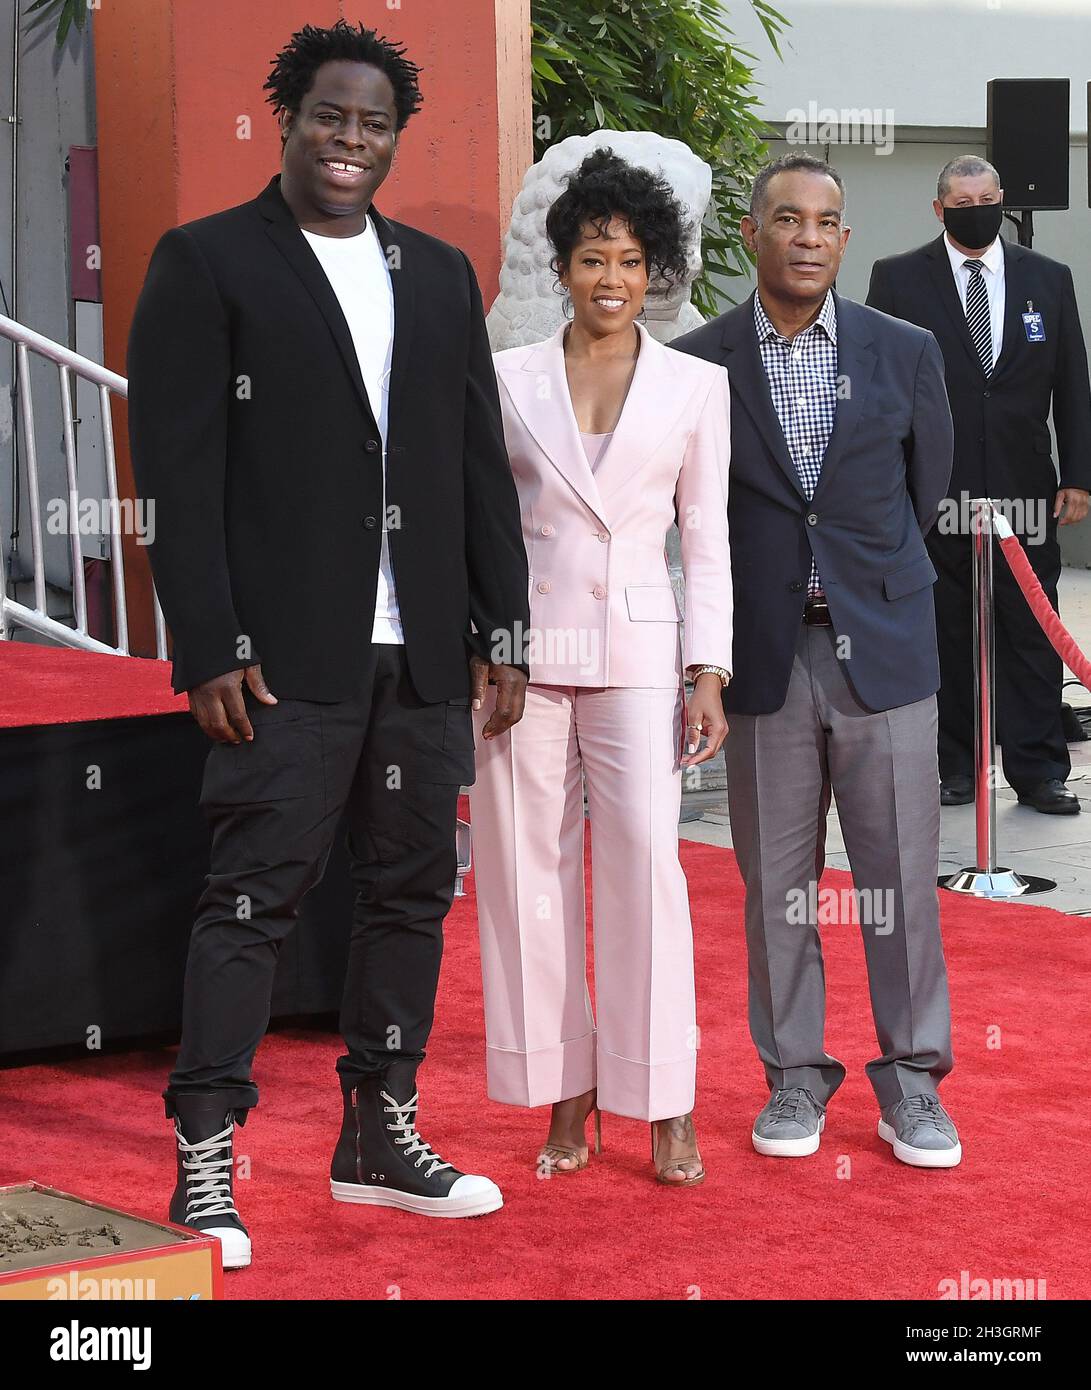 Los Angeles, USA. 28th Oct, 2021. (L-R) Jeymes Samuel, Regina King, and James Lassiter at Regina King's Hand & Footprint Ceremony held at the TCL Chinese Theatre in Hollywood, CA on Thursday, ?October 28, 2021. (Photo By Sthanlee B. Mirador/Sipa USA) Credit: Sipa USA/Alamy Live News Stock Photo